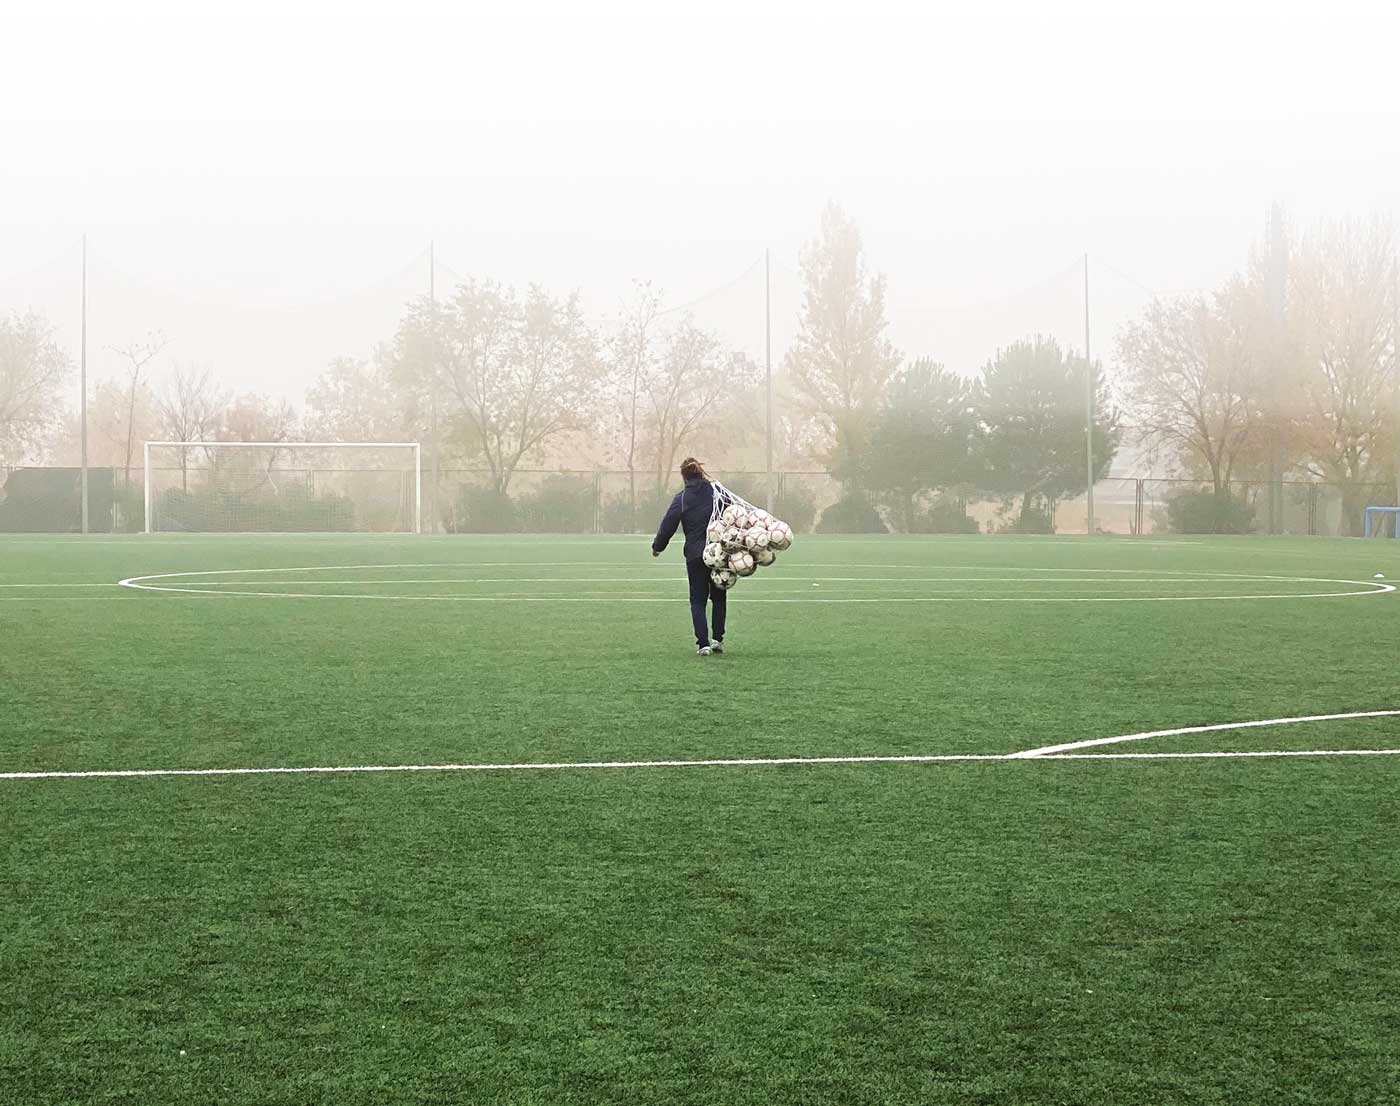 A Soccer trainer is seen walking across a foggy soccer field, carrying a large net bag full of soccer balls over their shoulder. The soccer goal is visible in the background, partially obscured by the mist, and the trees lining the field are faintly visible through the fog. By the leaning of the trainer we can assume He is struggling in carrying that bag of soccer balls all alone.